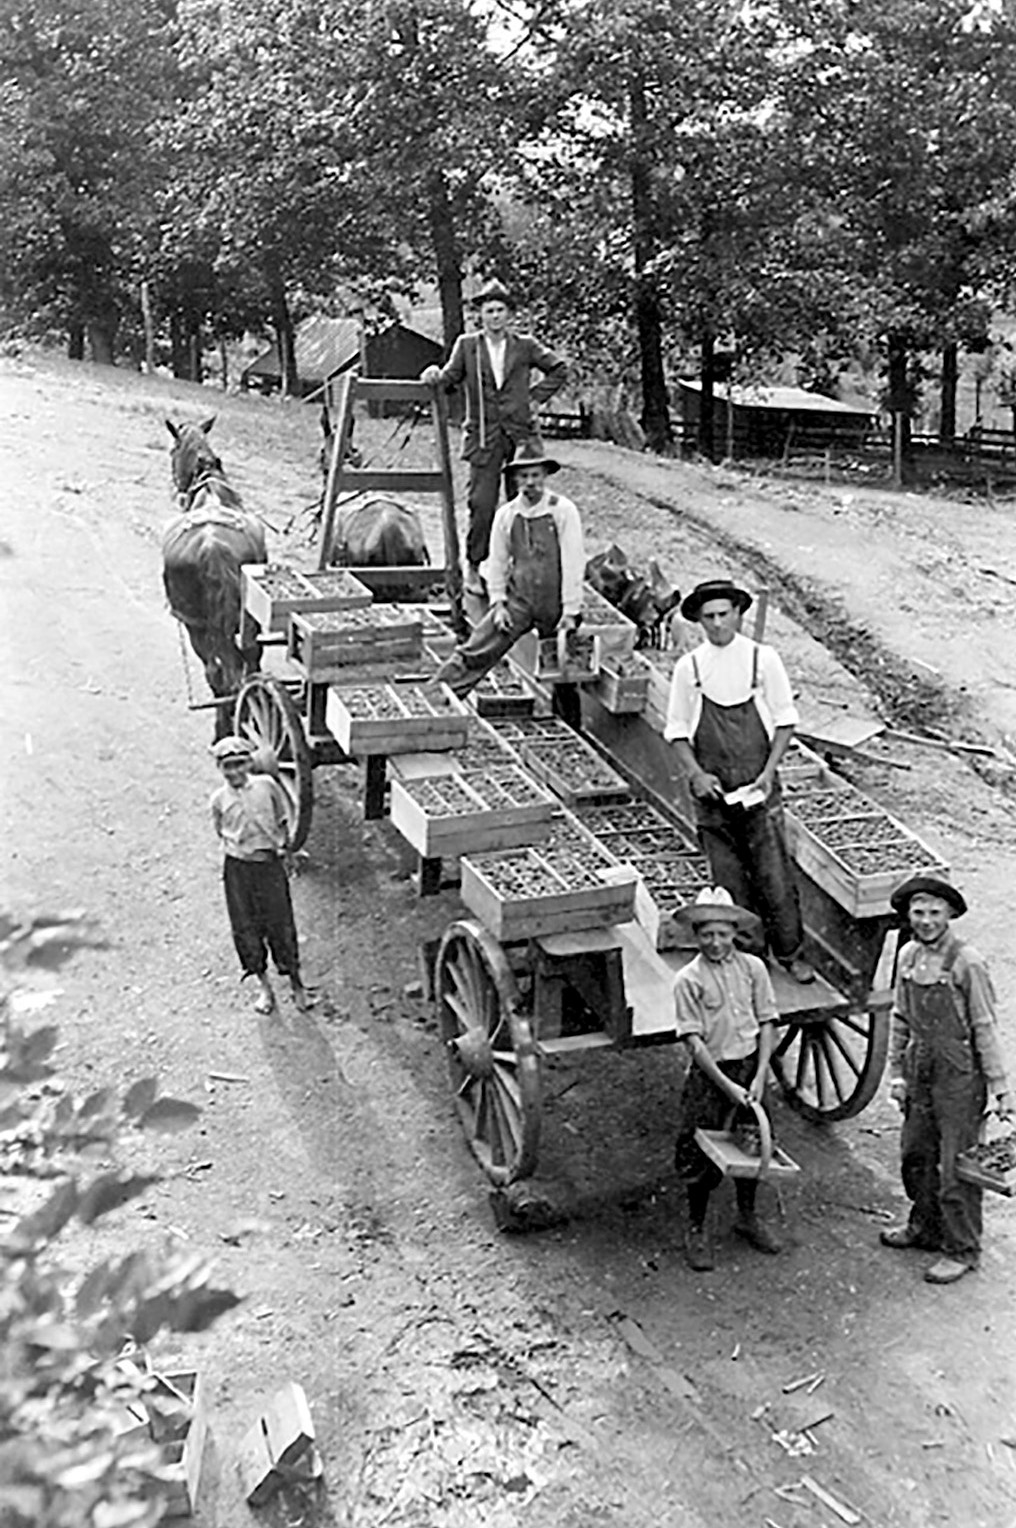 Student workers hauling strawberries